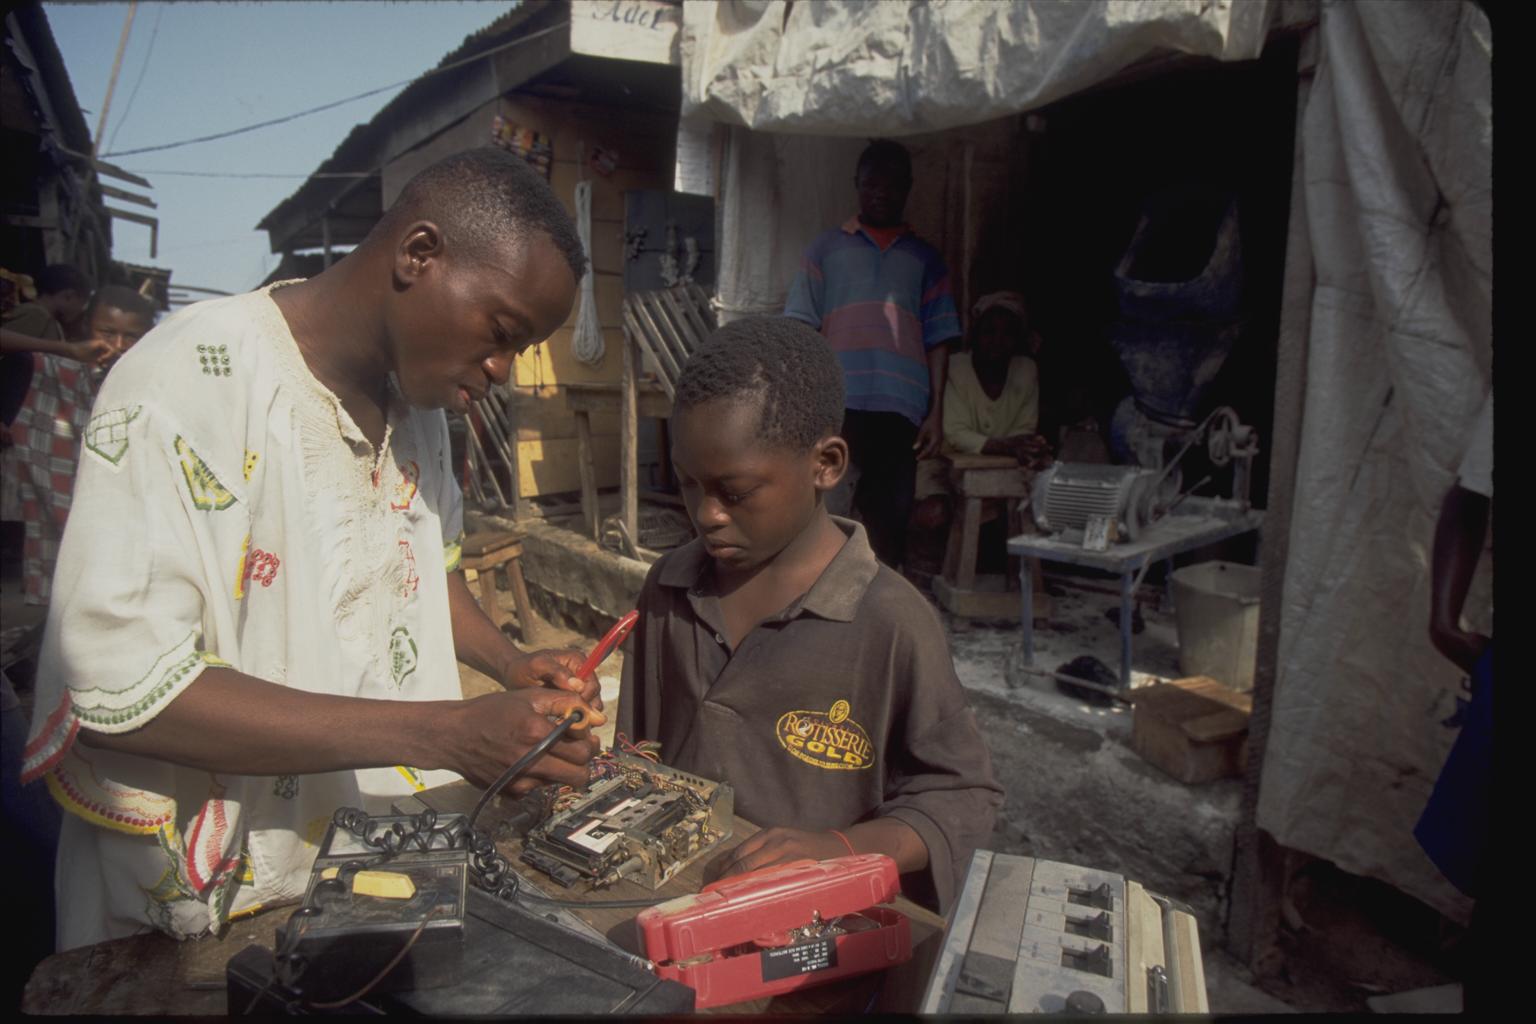 In 1998 in Nigeria, a man teaches Andrew, a 13-year-old boy who lives on the streets, to repair electronics equipment during a workshop at a vocational centre in Ibadan, capital of the south-western state of Oyo.